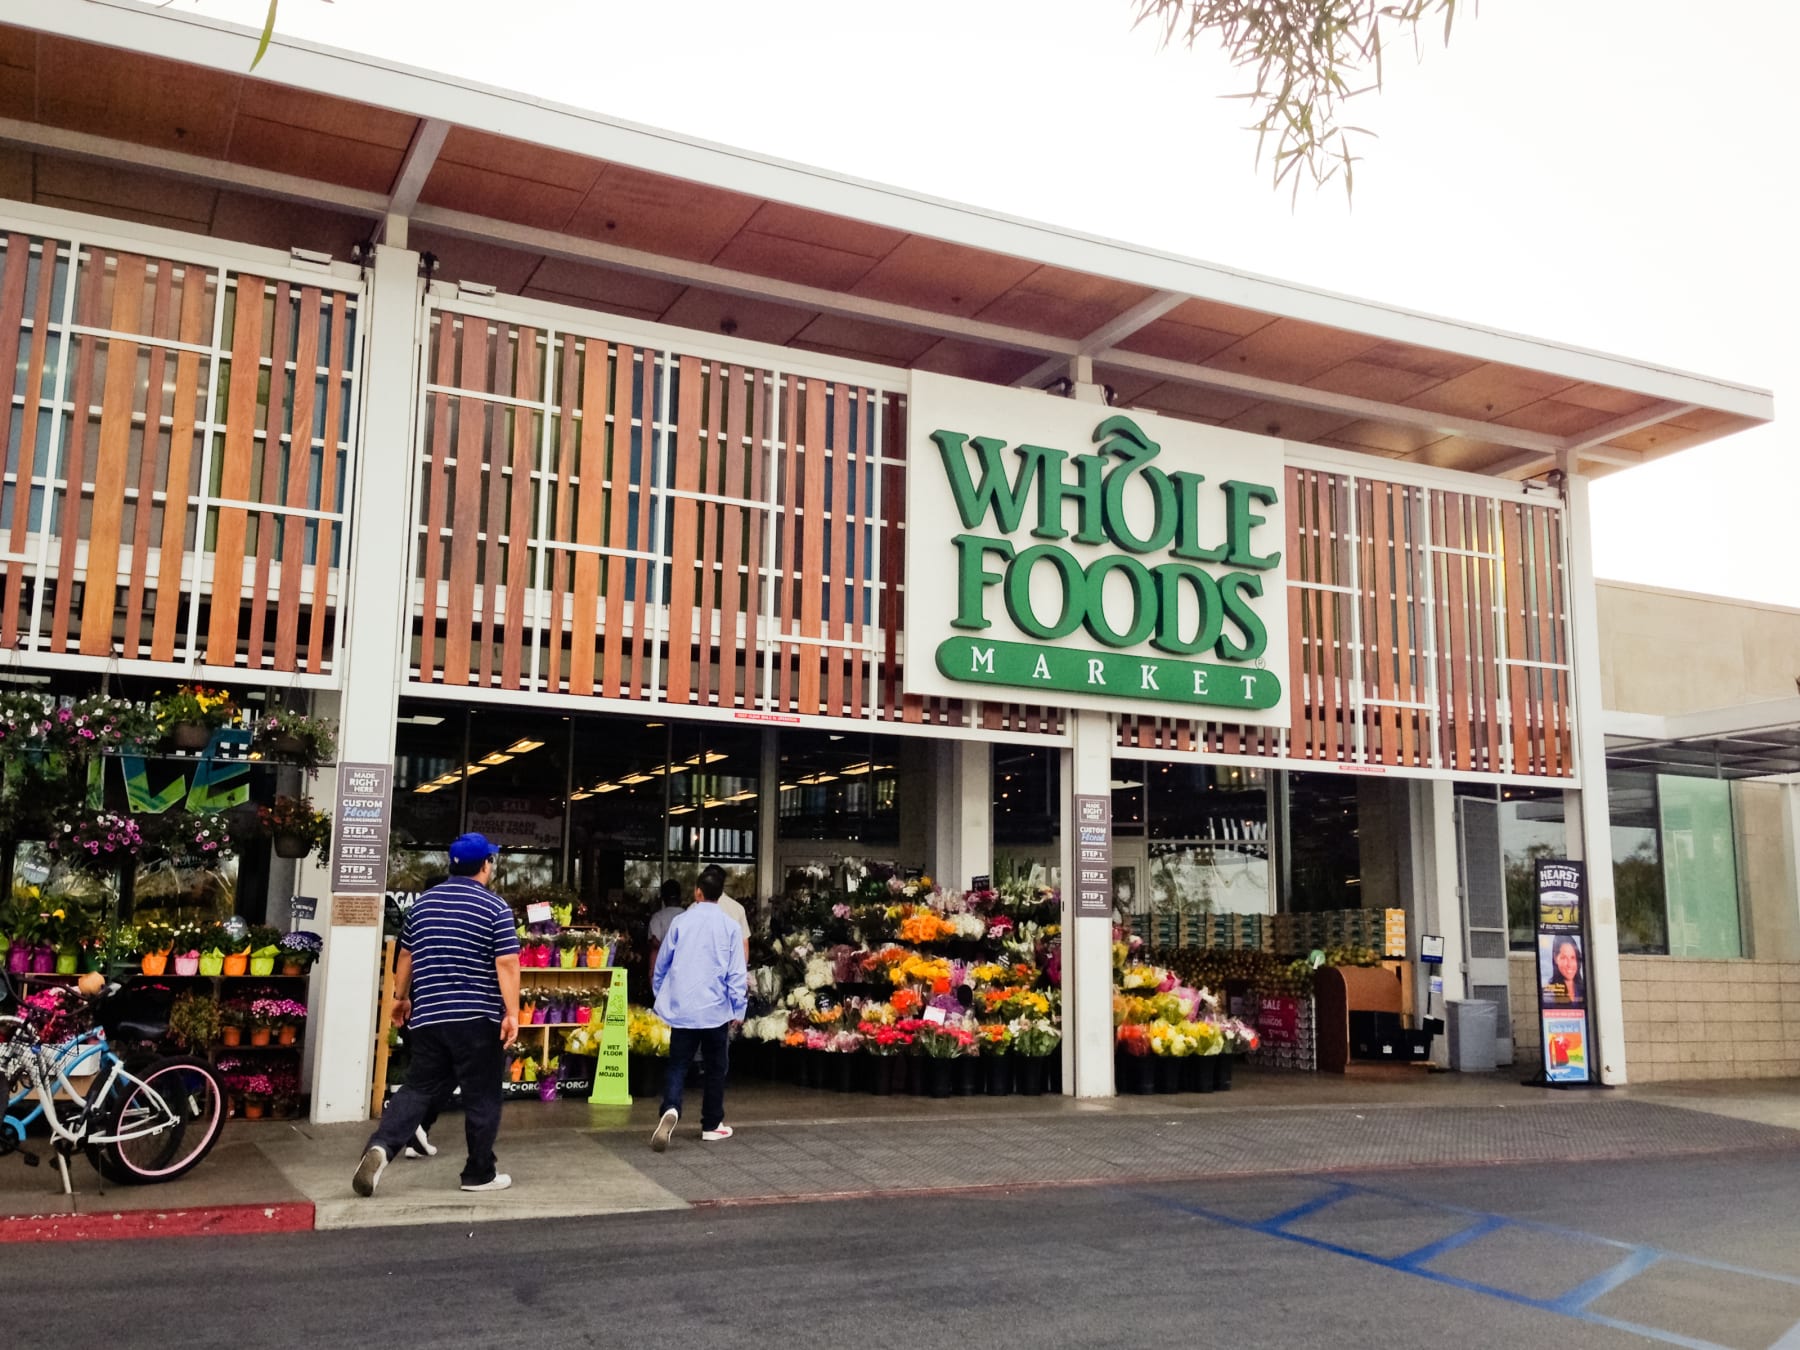 Exterior of Whole Foods